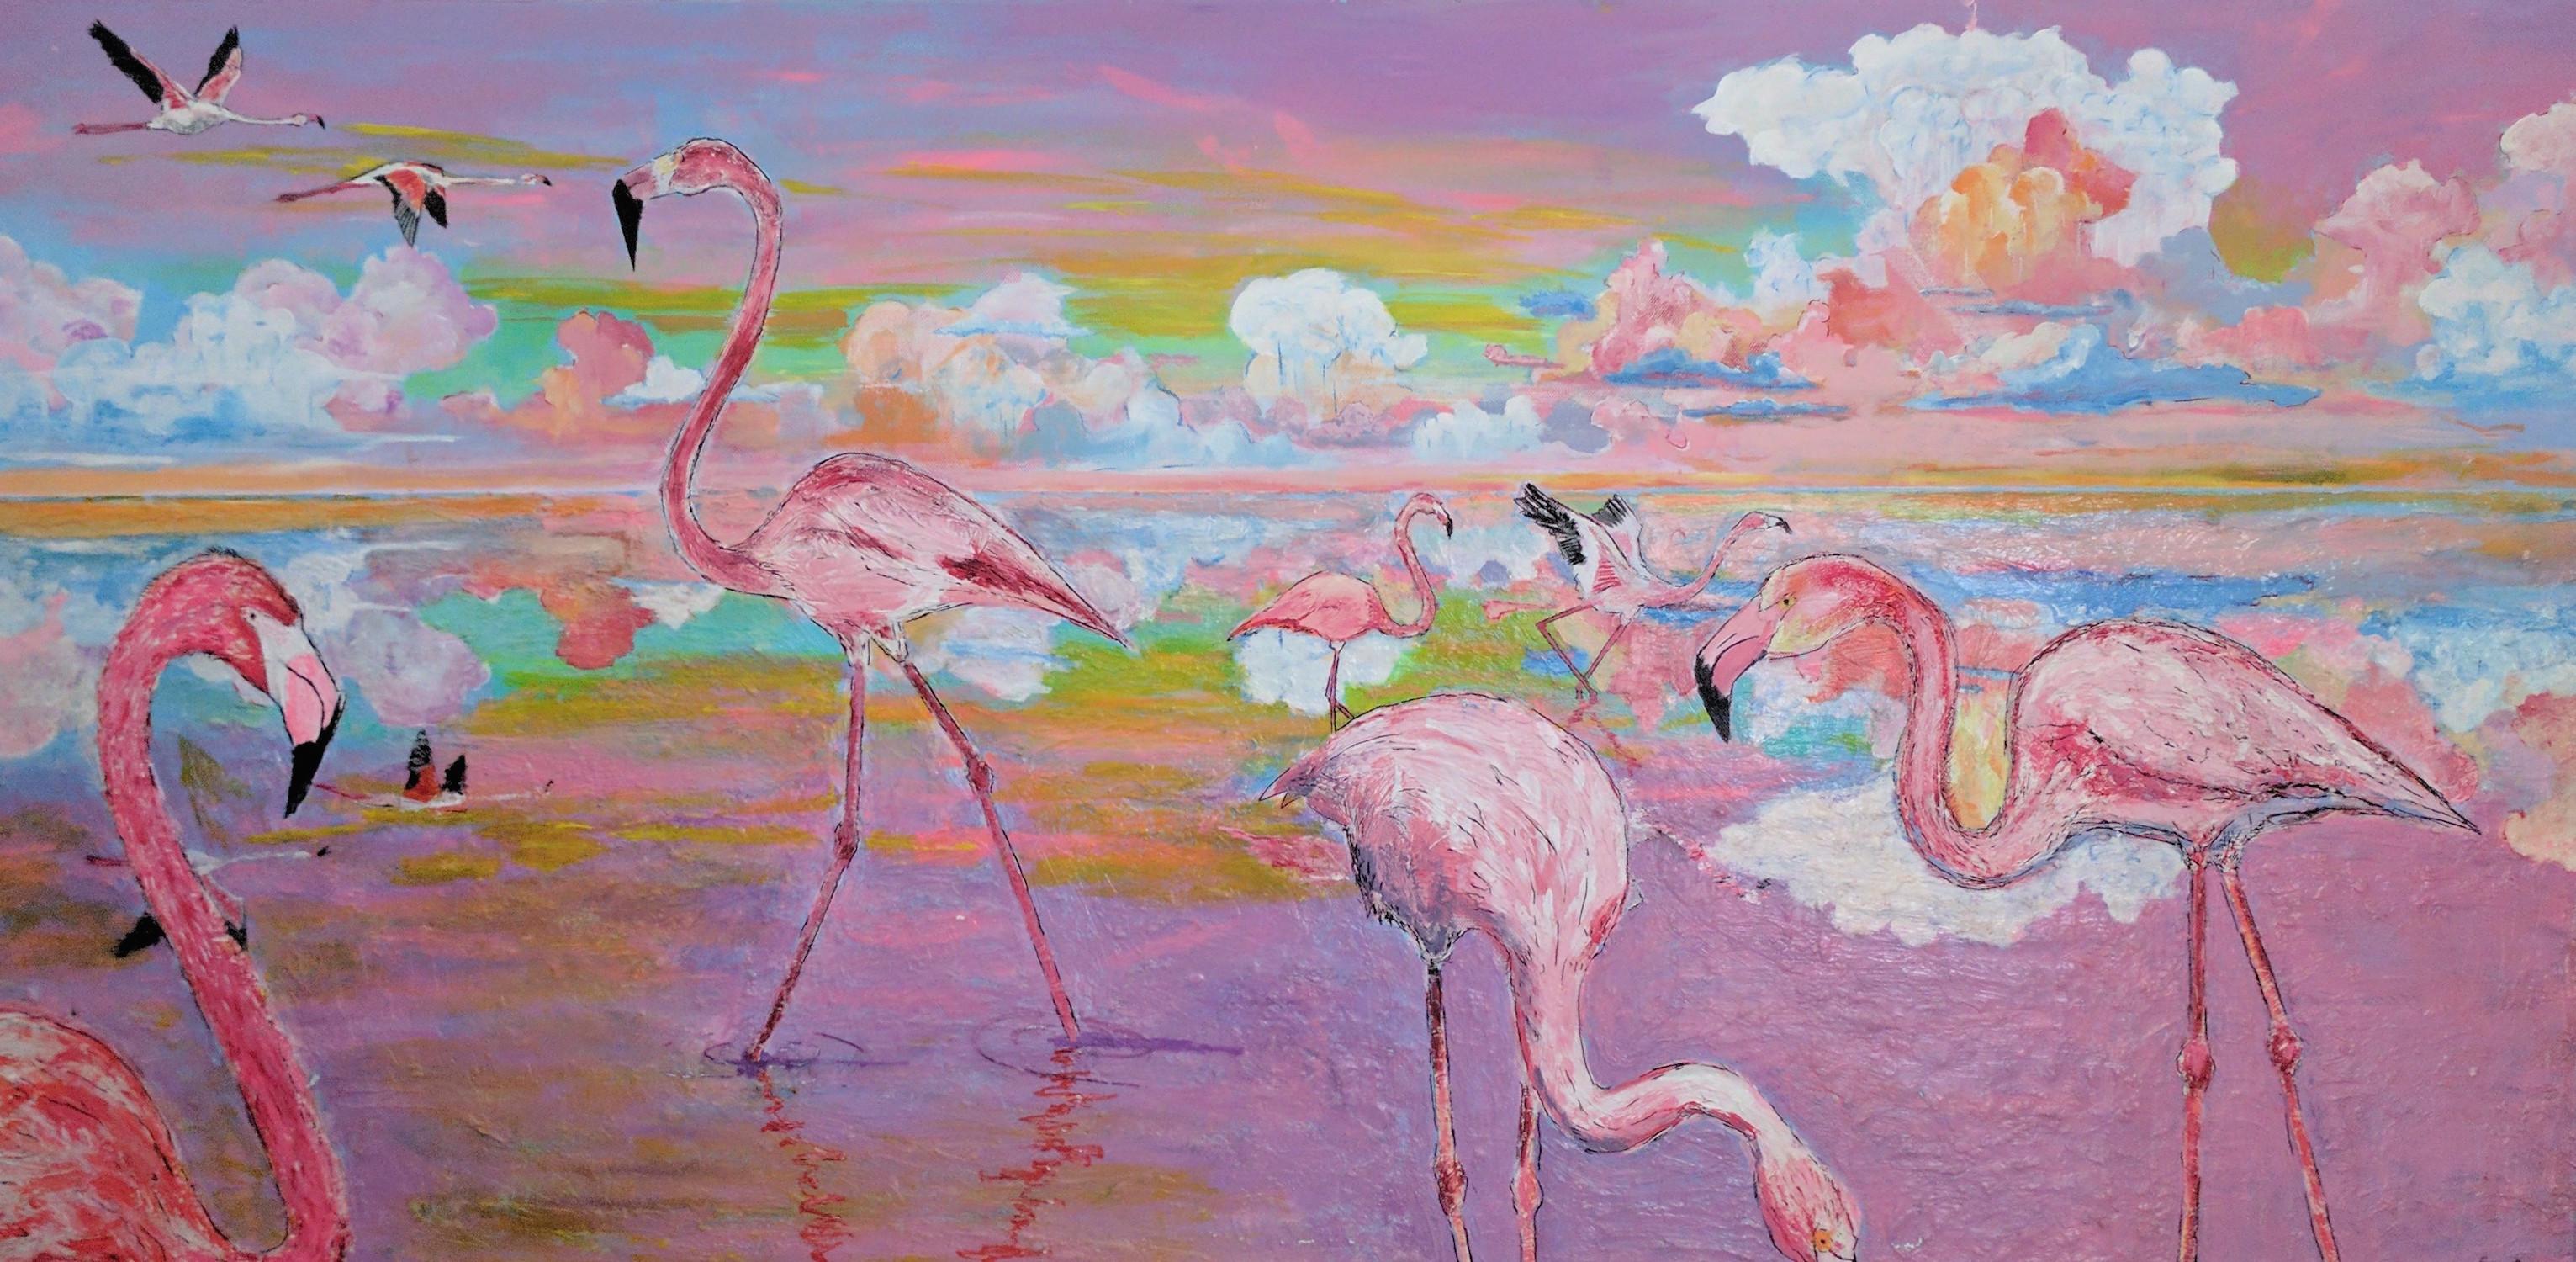 "Leisure", acrylic painting, flamingos, birds, clouds, sunset, pink, purple - Painting by Frantz Lexy